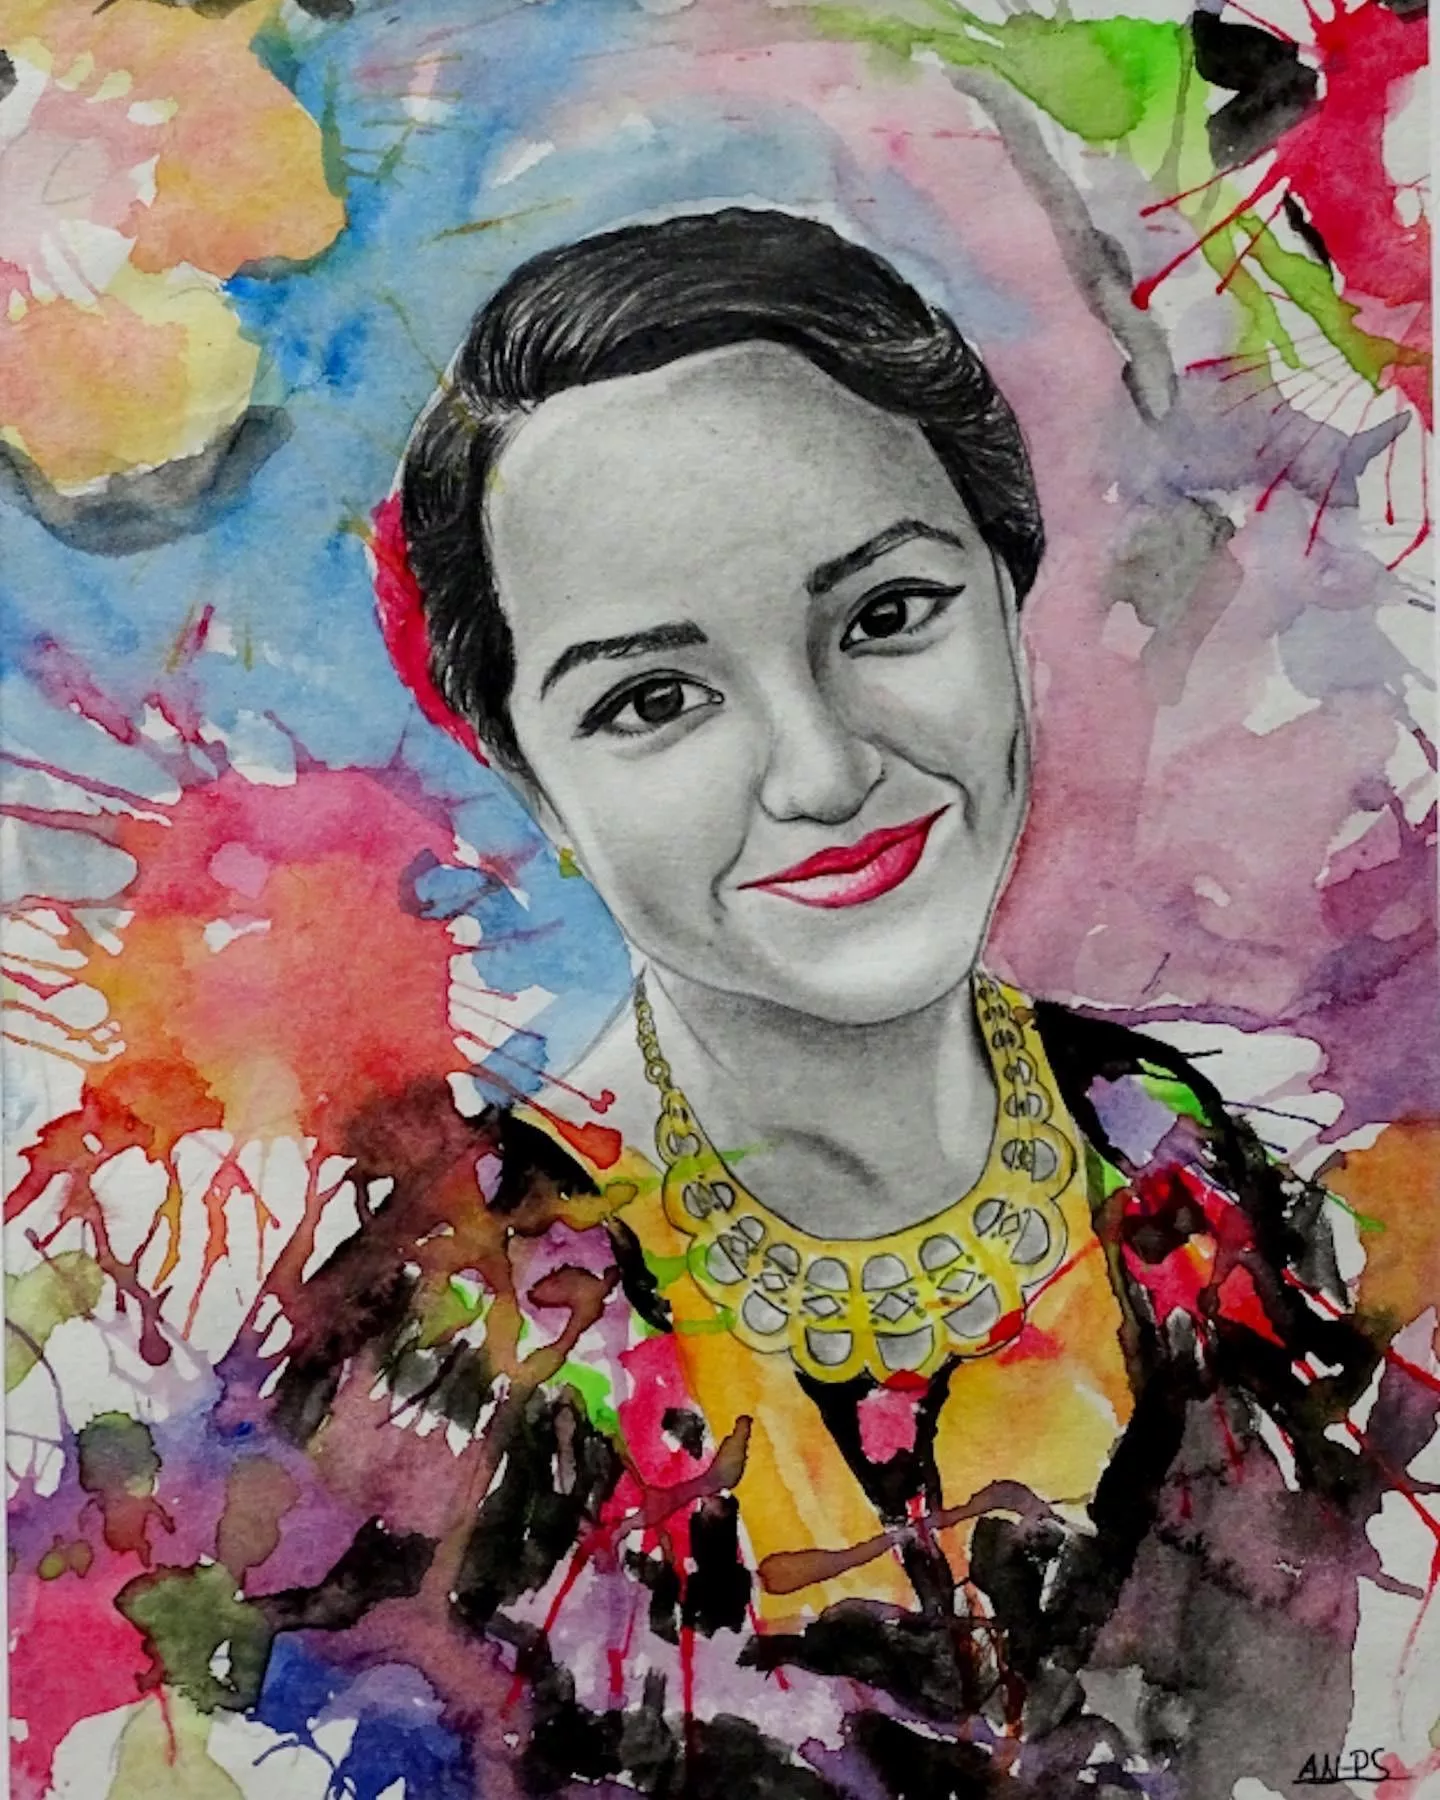 A portrait of a Latina. Her head is depicted in black and white with red lips. Her black hair is swept back by a partially visable red flower. She is wearing a black dress with a yellow front and a large gold necklace with white stones.